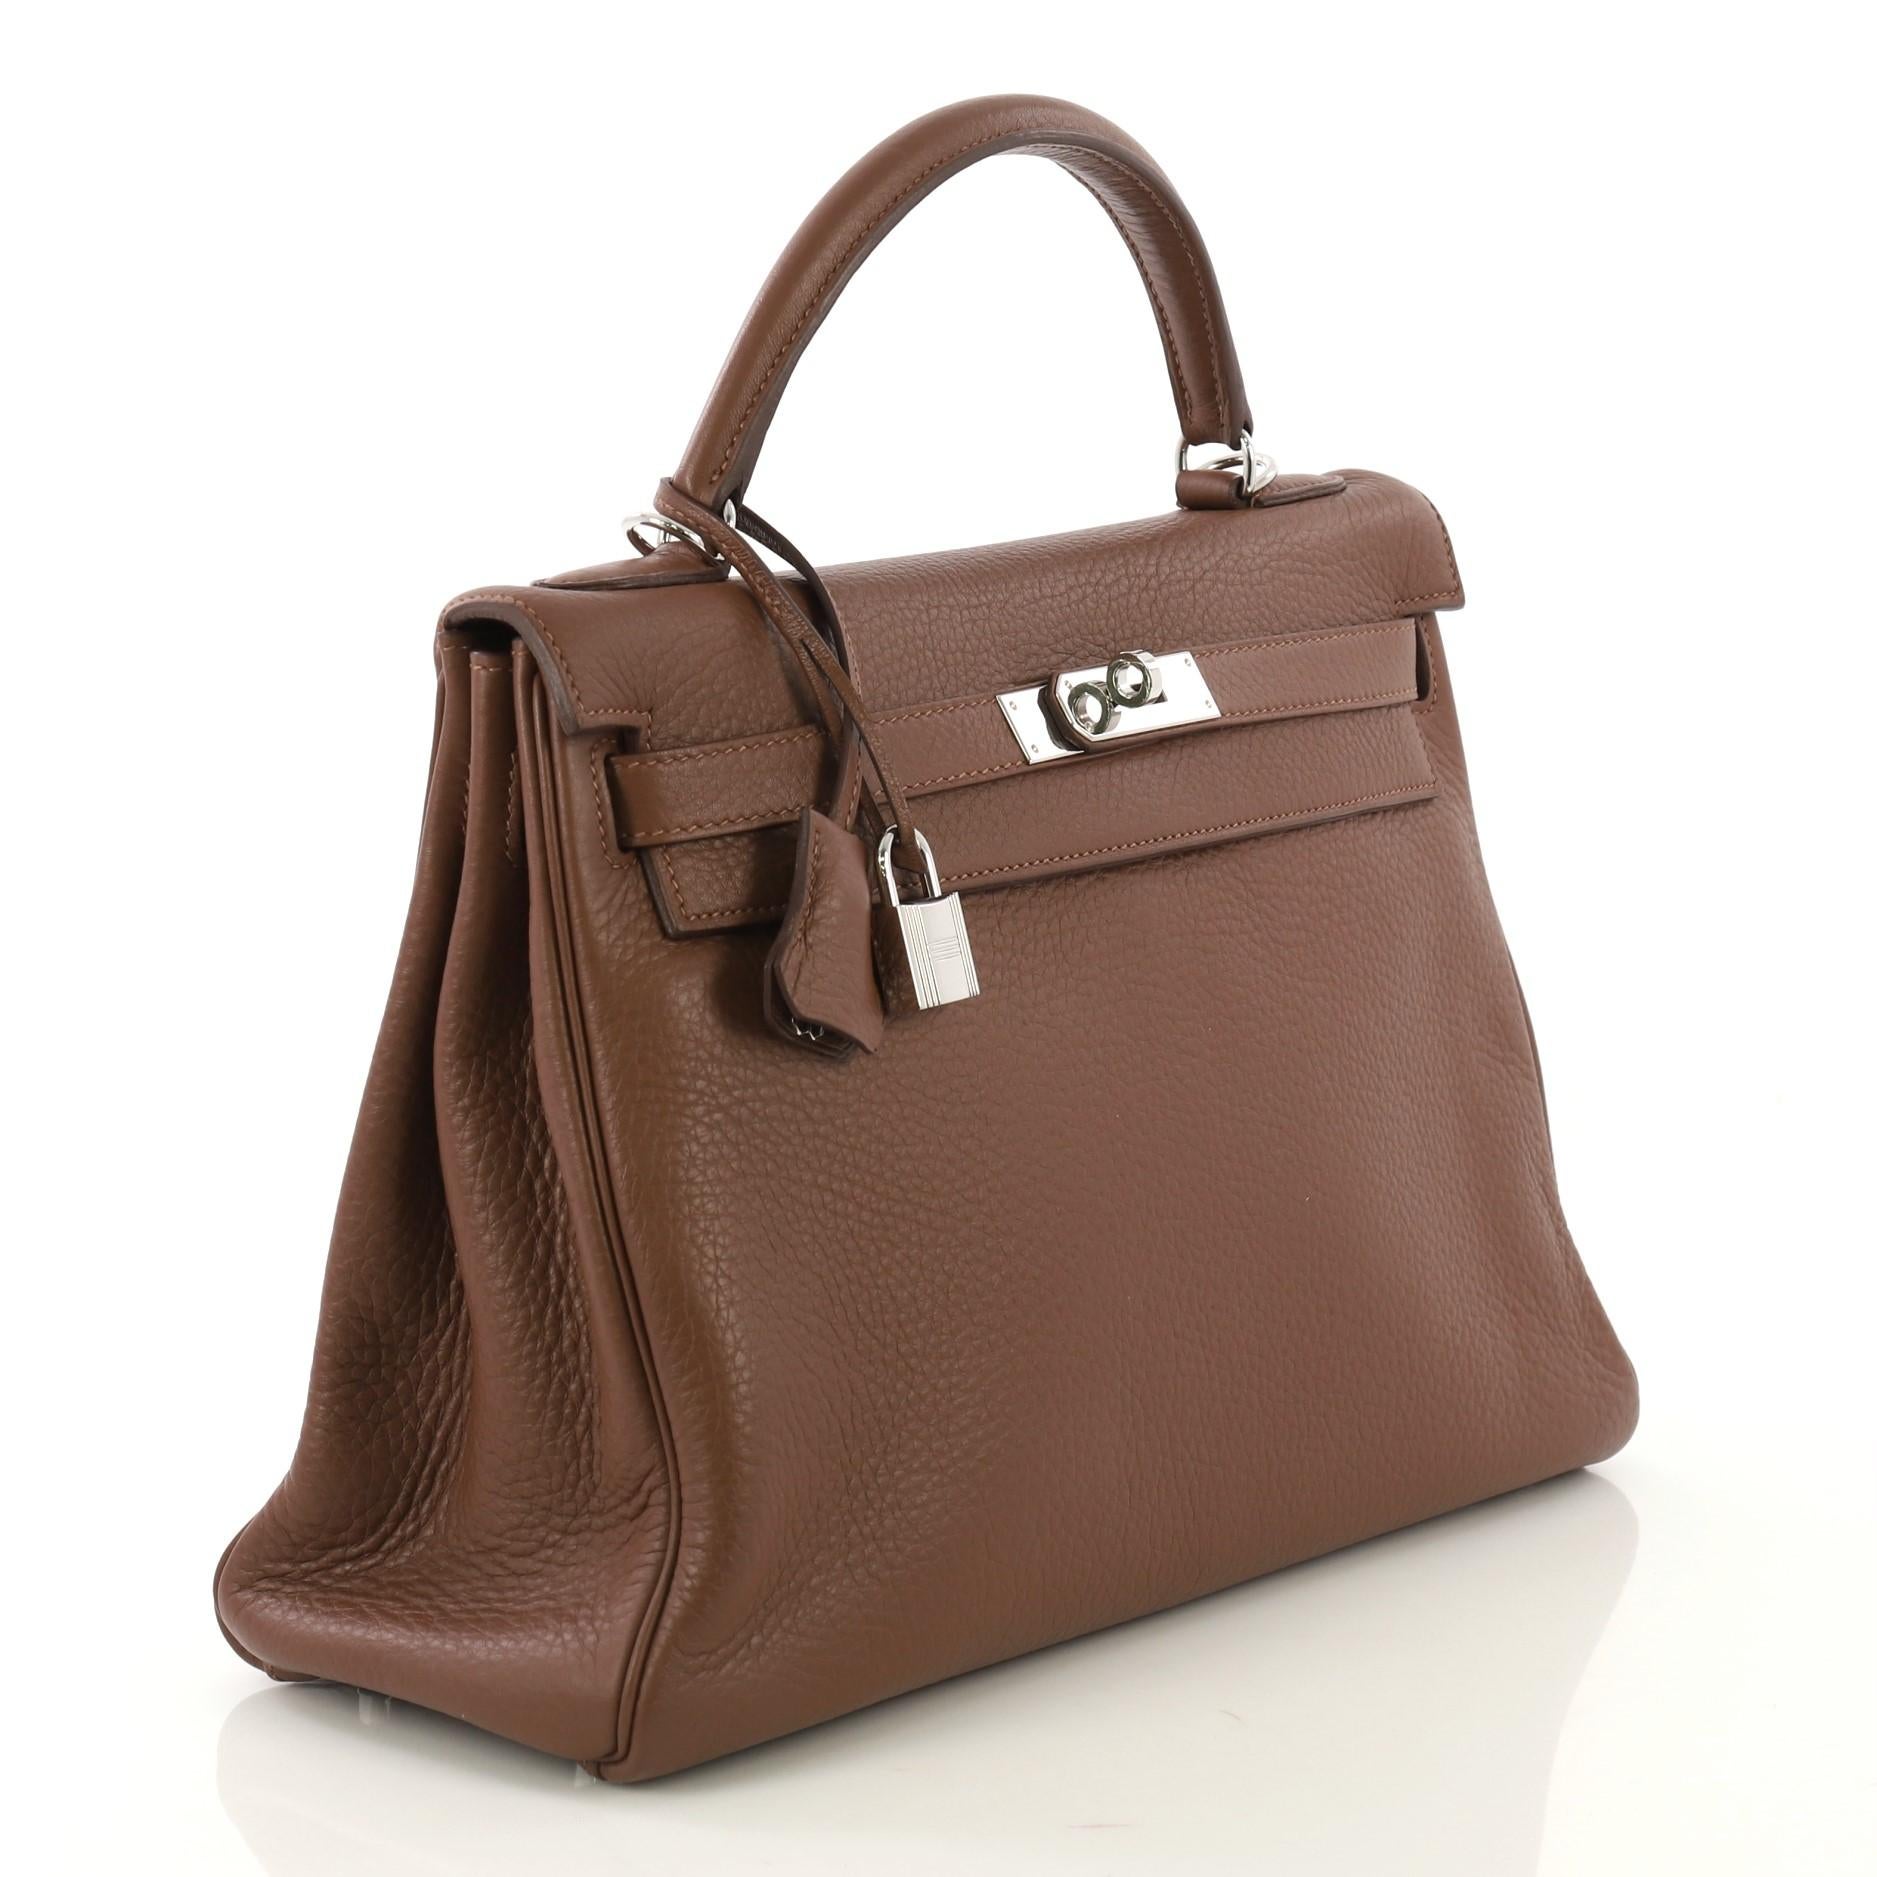 This Hermes Kelly Amazone Handbag Marron d'Inde Clemence with Palladium Hardware 32, crafted in Marron d'Inde brown Clemence leather, features a single rolled top handle, protective base studs, and palladium hardware. Its turn-lock closure opens to